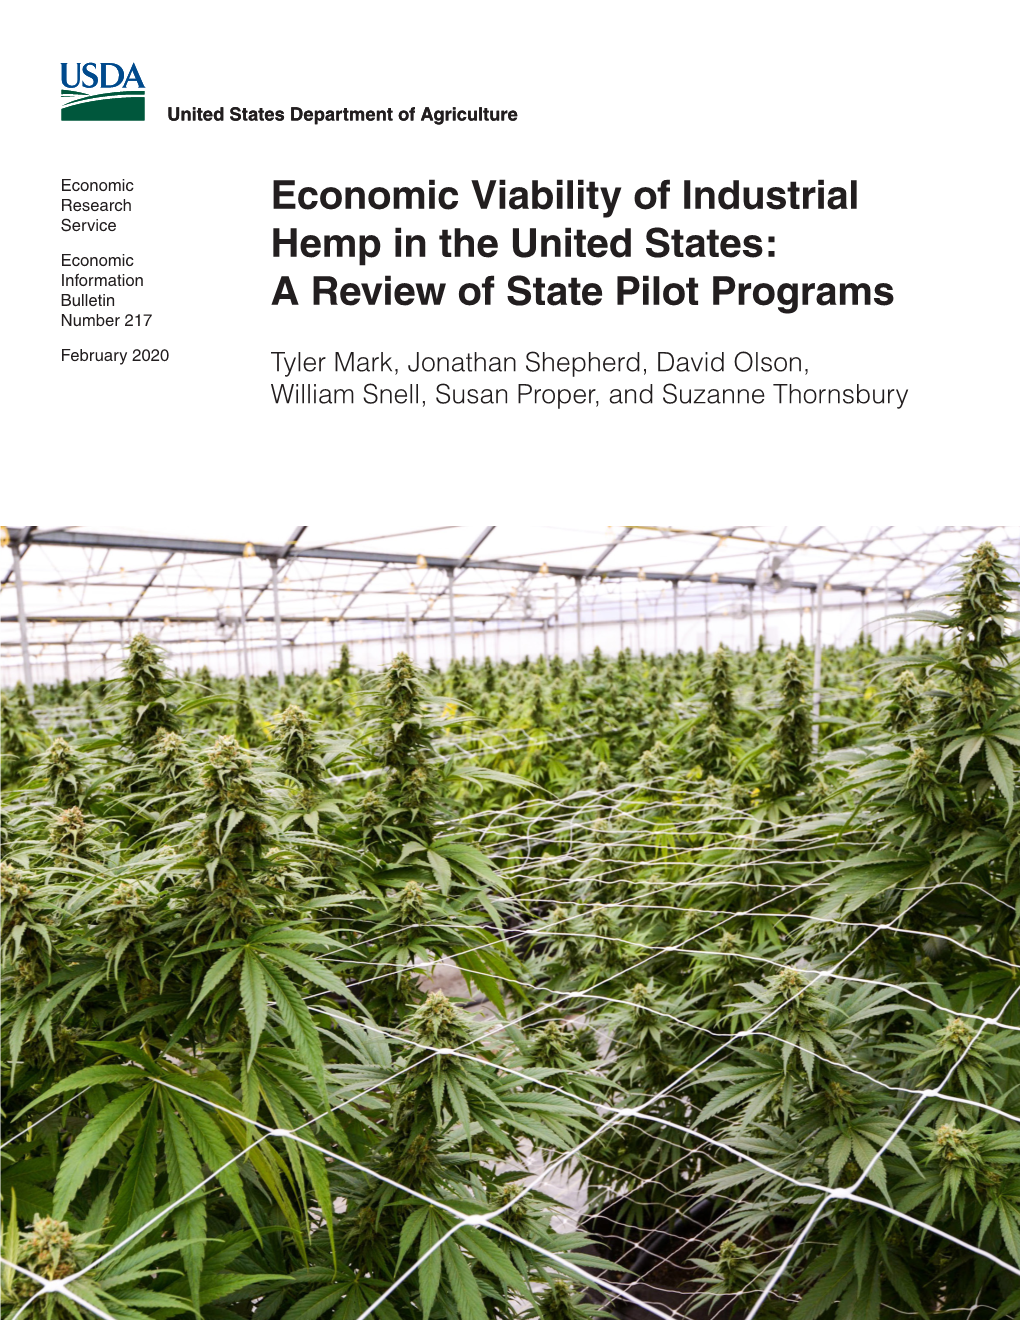 Economic Viability of Industrial Hemp in the United States: a Review of State Pilot Programs, EIB-217, U.S